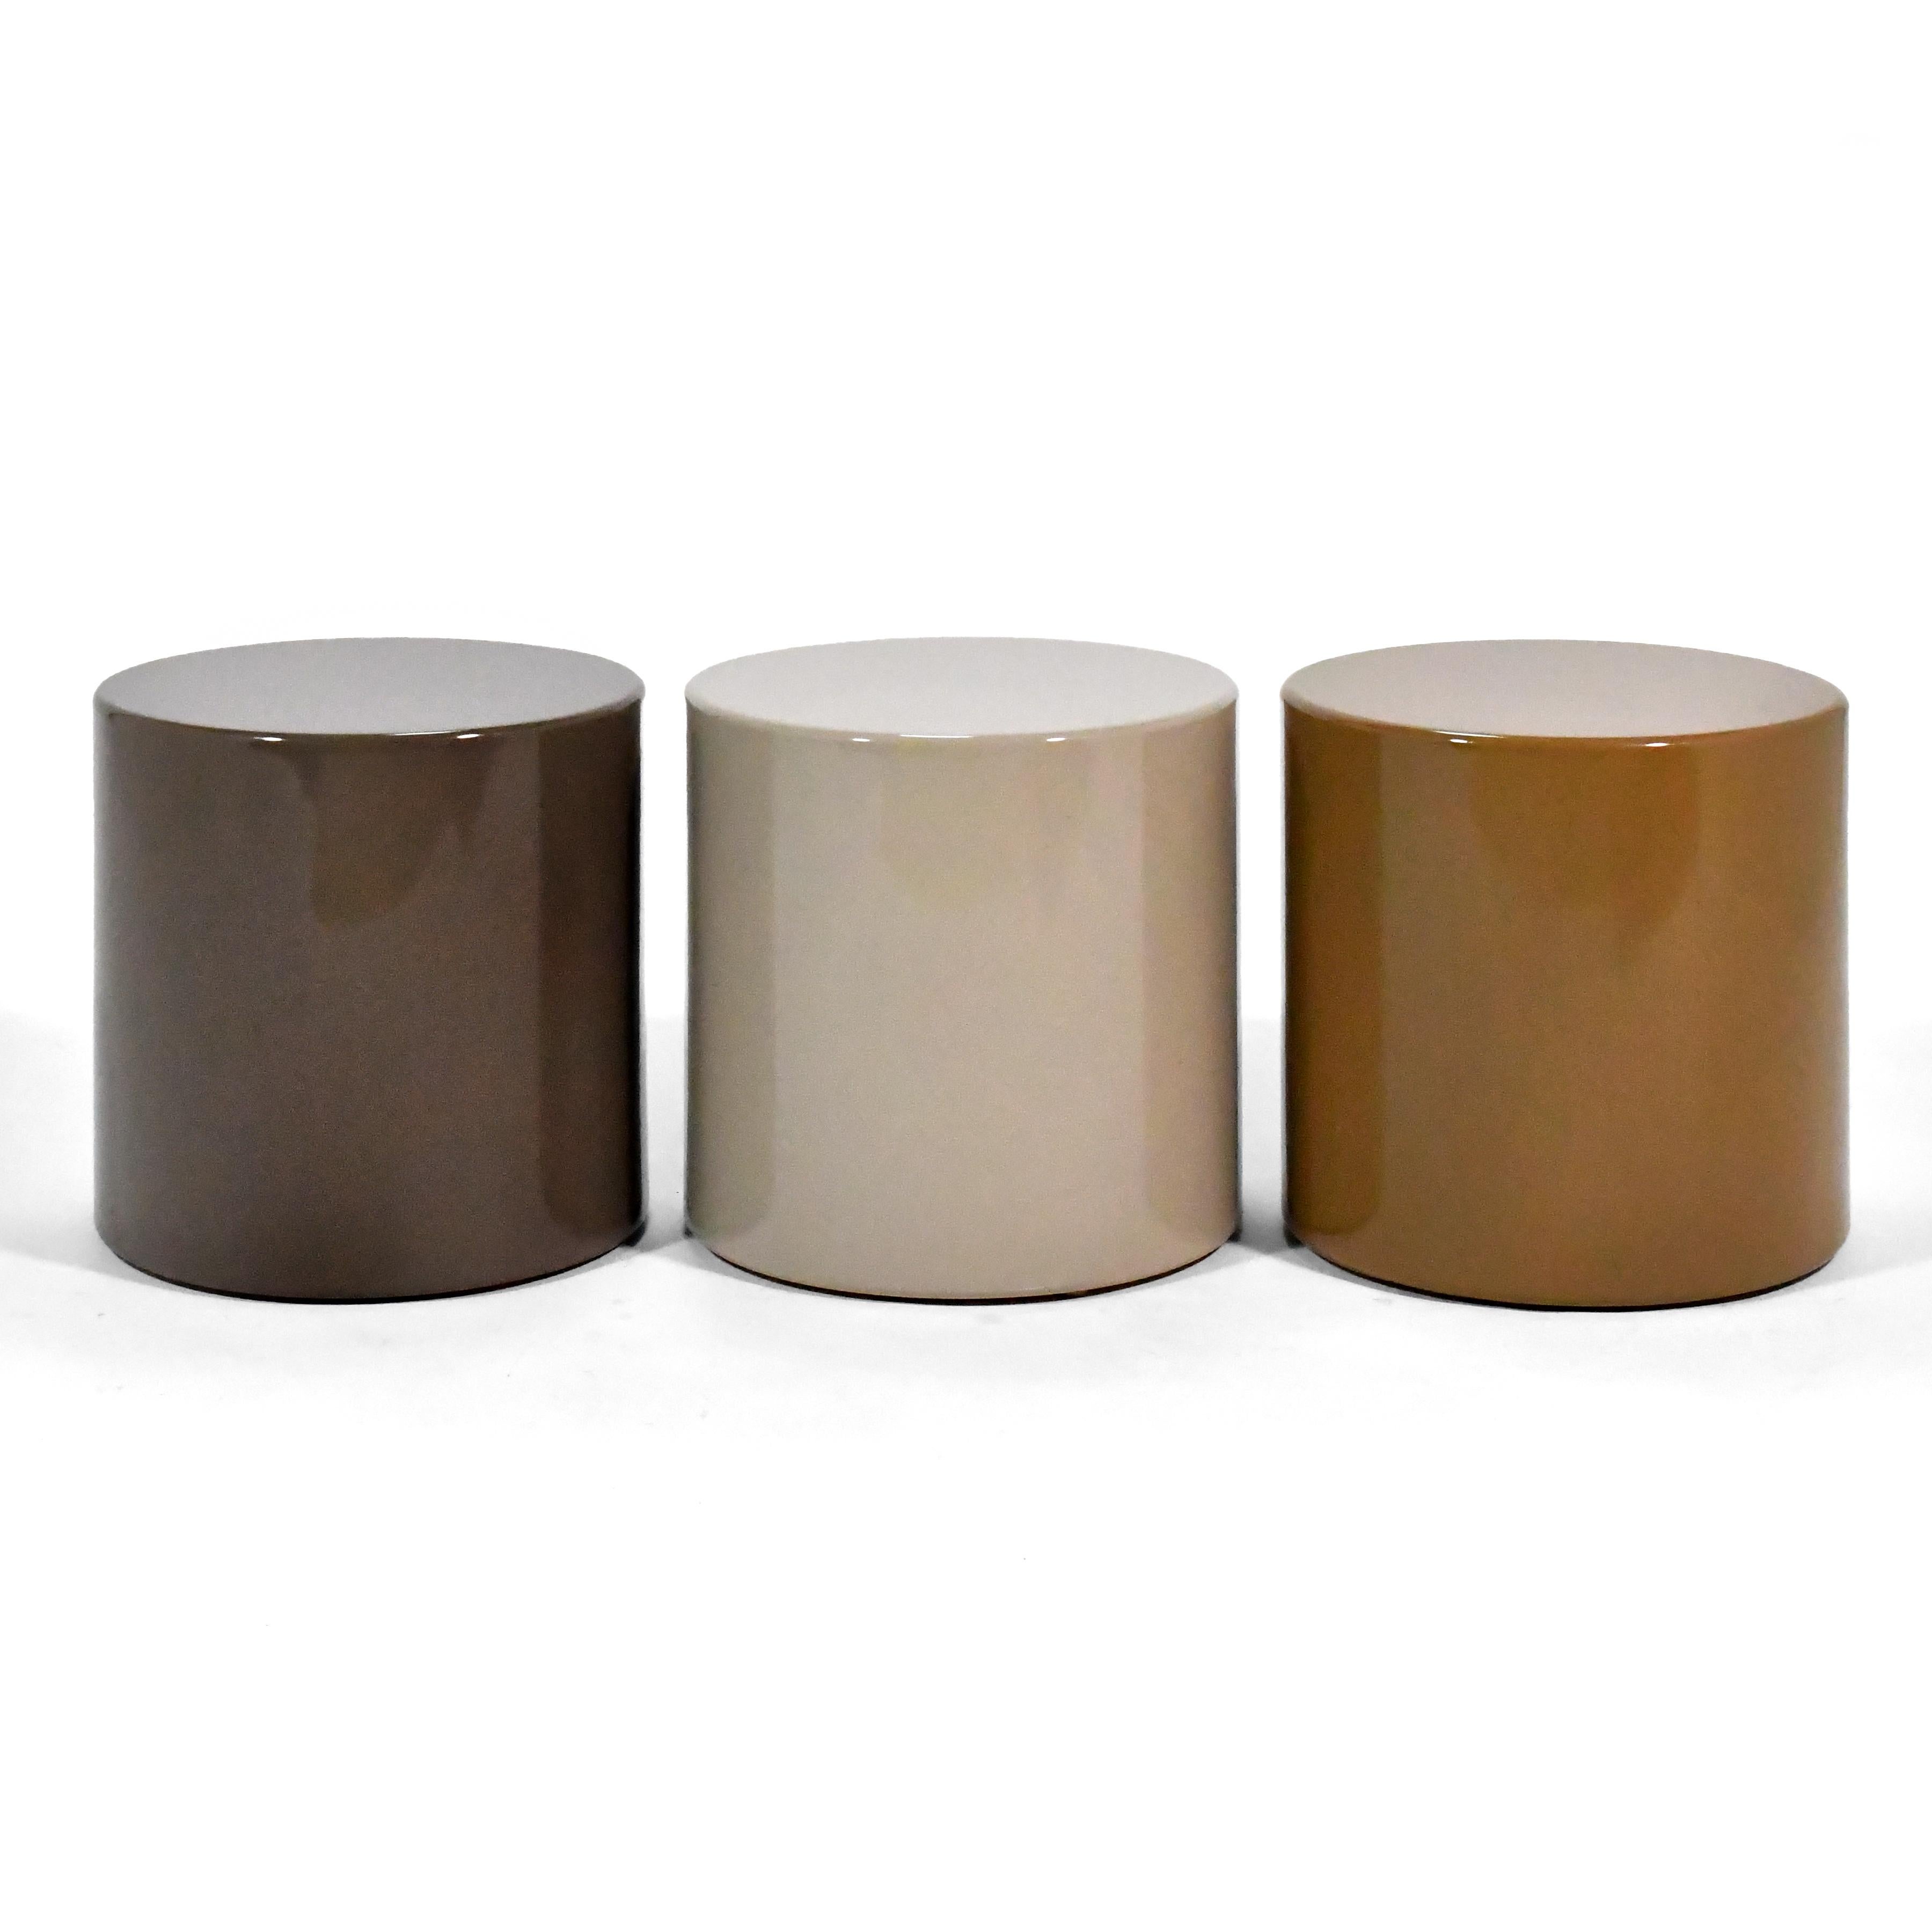 These minimalist, cylindrical tables by Metro are finished in a beautiful muted palate of Gray, Taupe and Cider Brown. They can be used individually or as a grouping, and are sturdy enough that they could be used as stools.

16.25”h X 15.75”d.